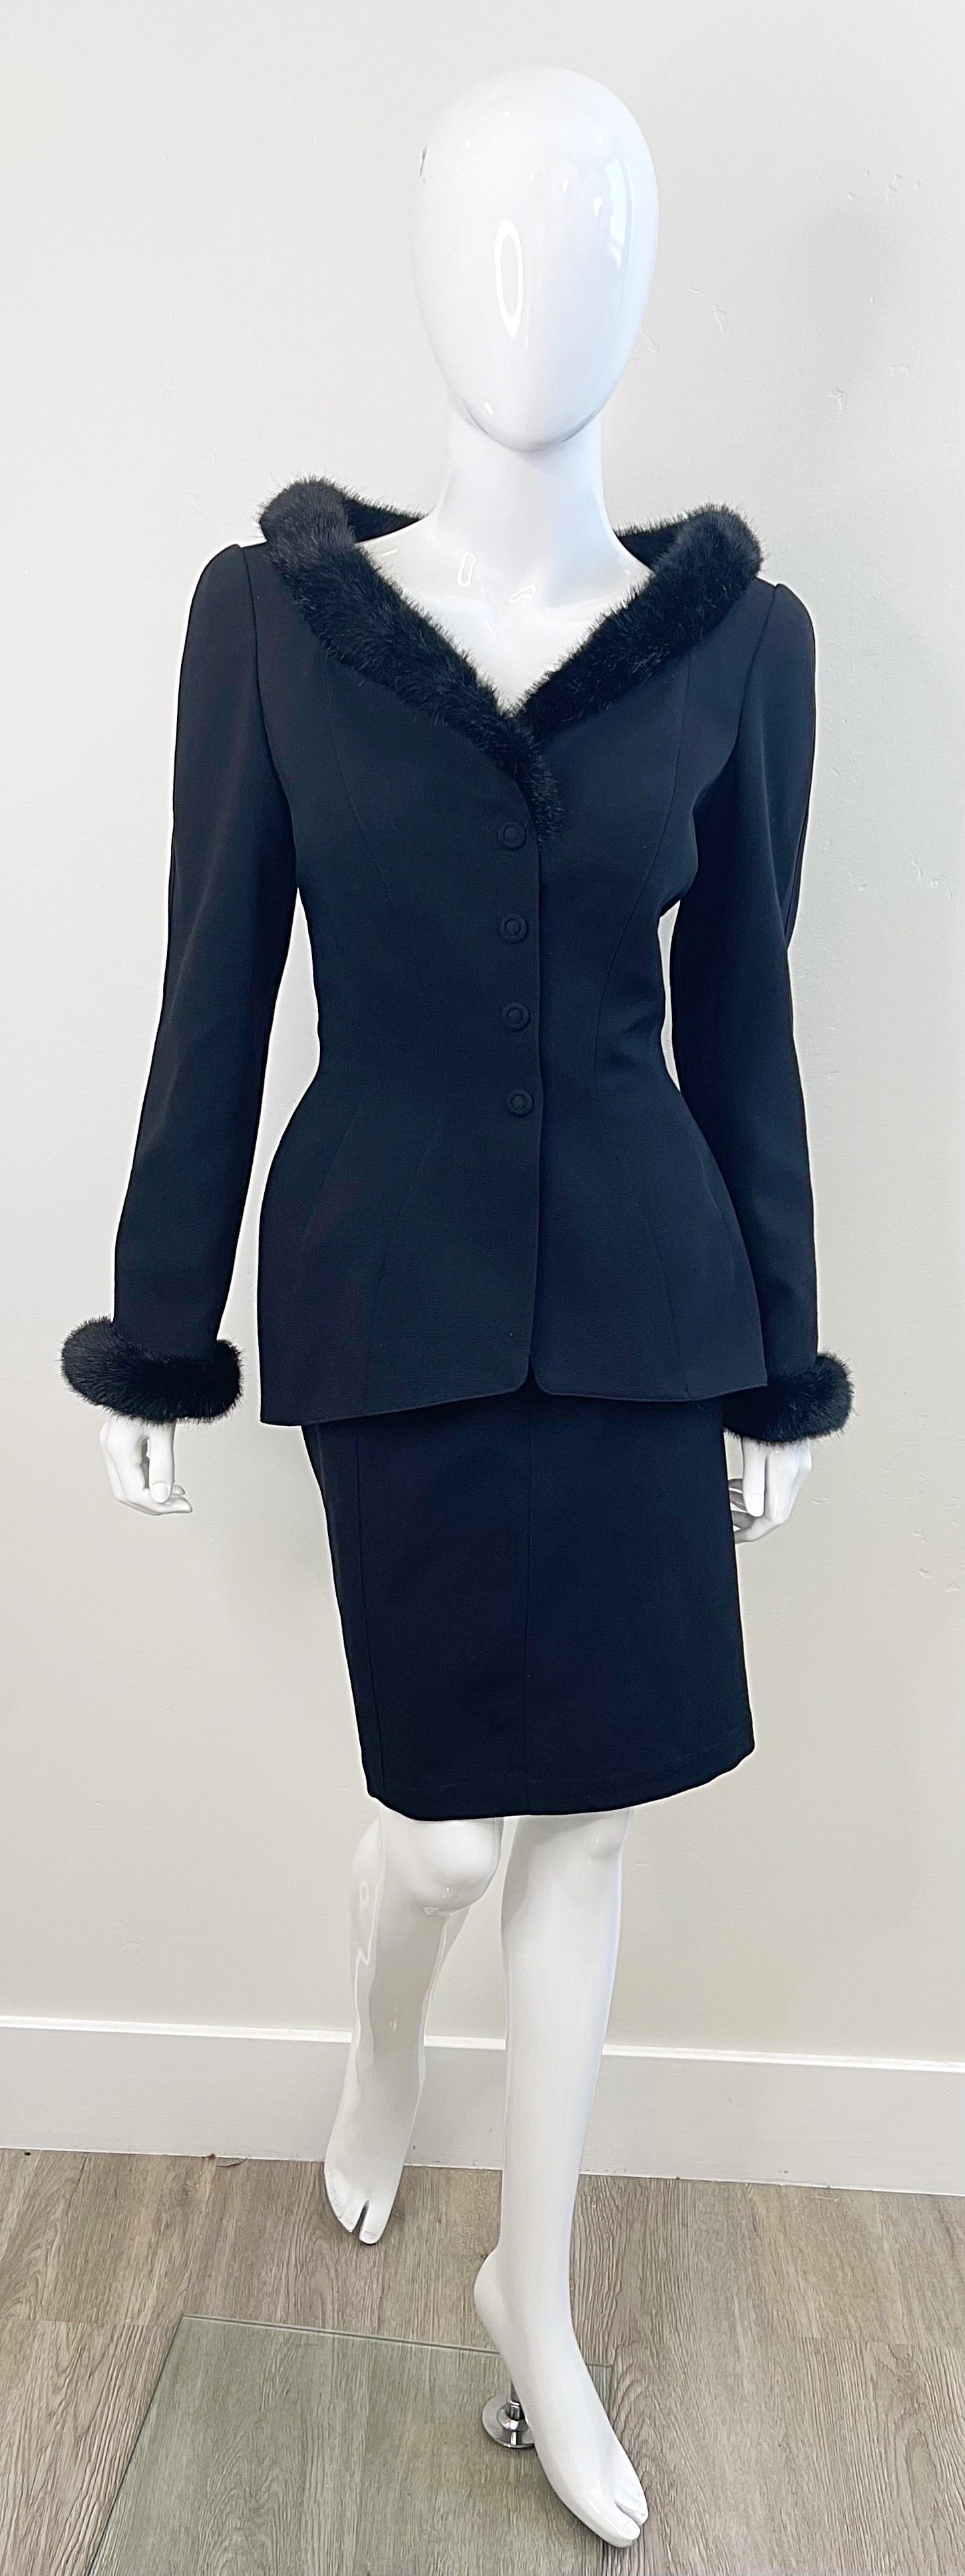 Thierry Mugler Fall 1991 Black Faux Fur Trim Size 40 / 6 Vintage 90 Skirt Suit In Excellent Condition For Sale In San Diego, CA